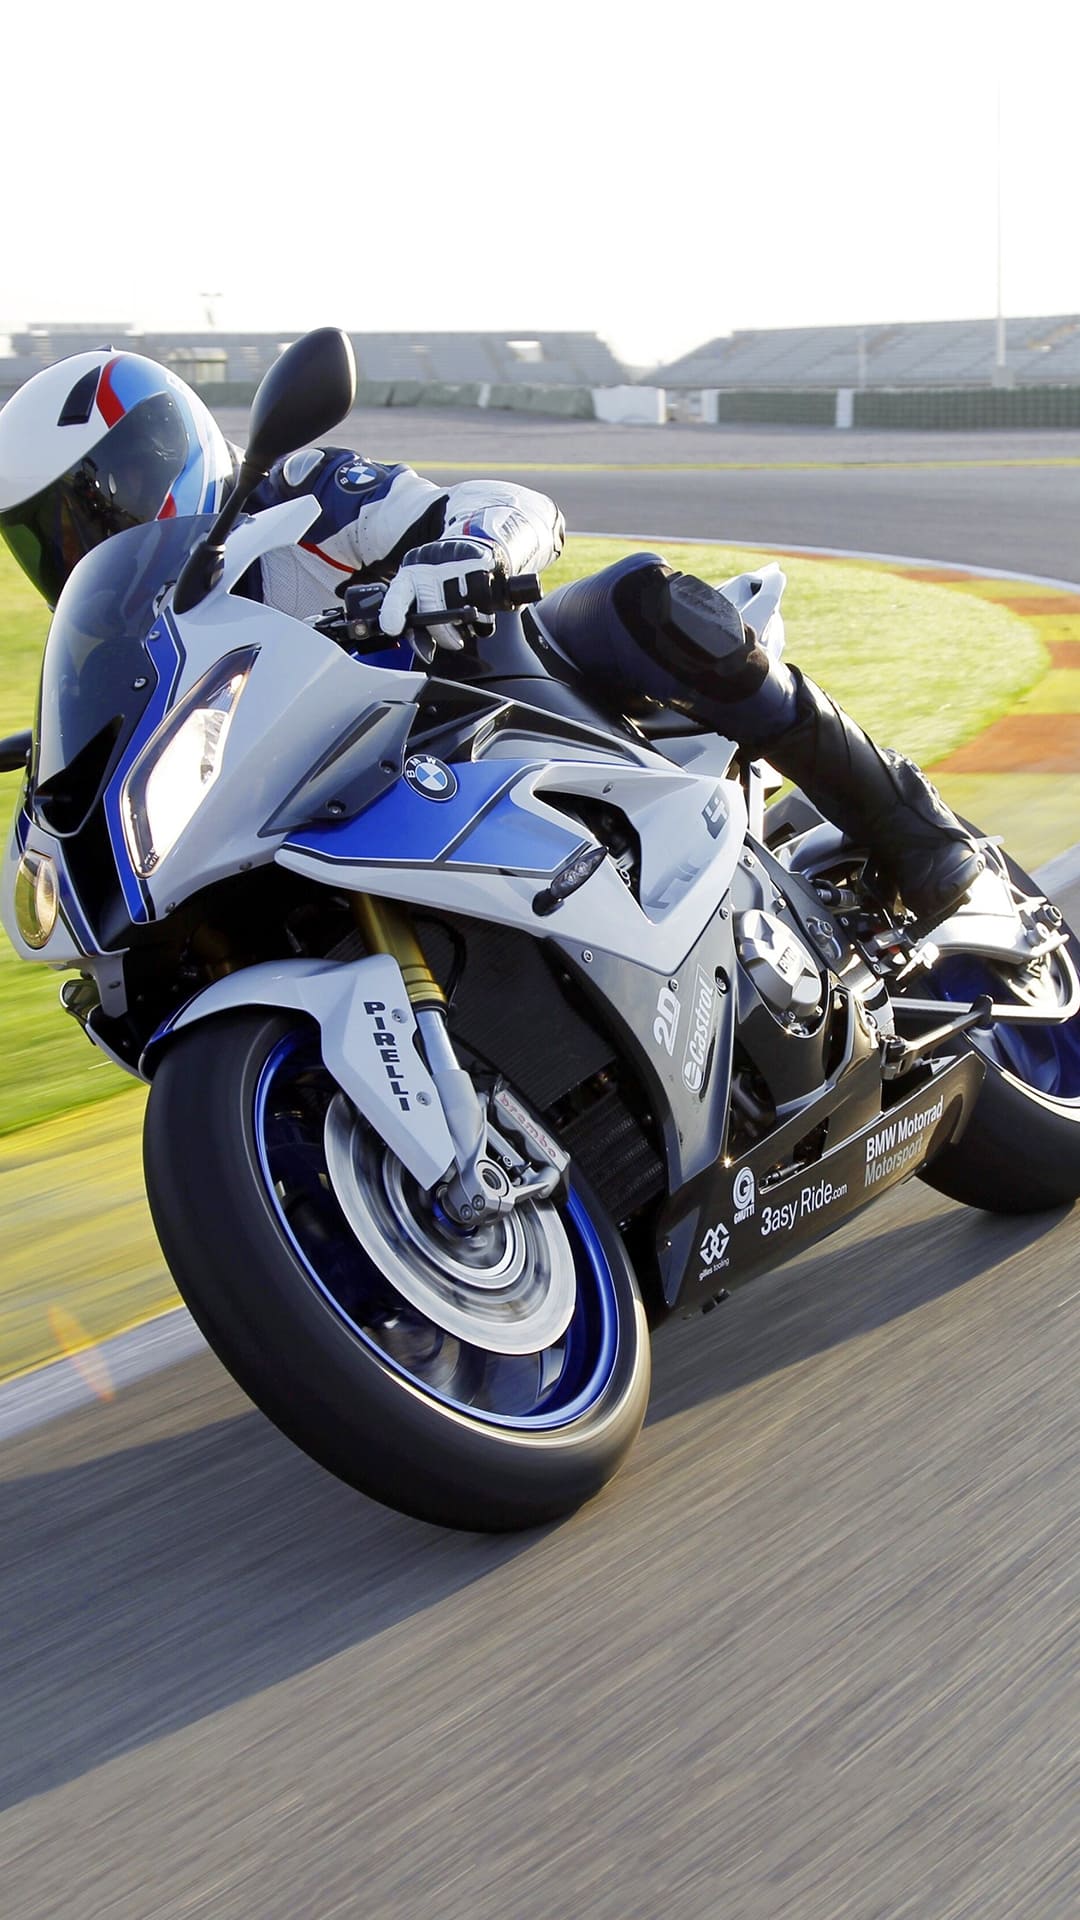 Bmw S1000rr Wallpapers, HD Bmw S1000rr Backgrounds, Free Images Download